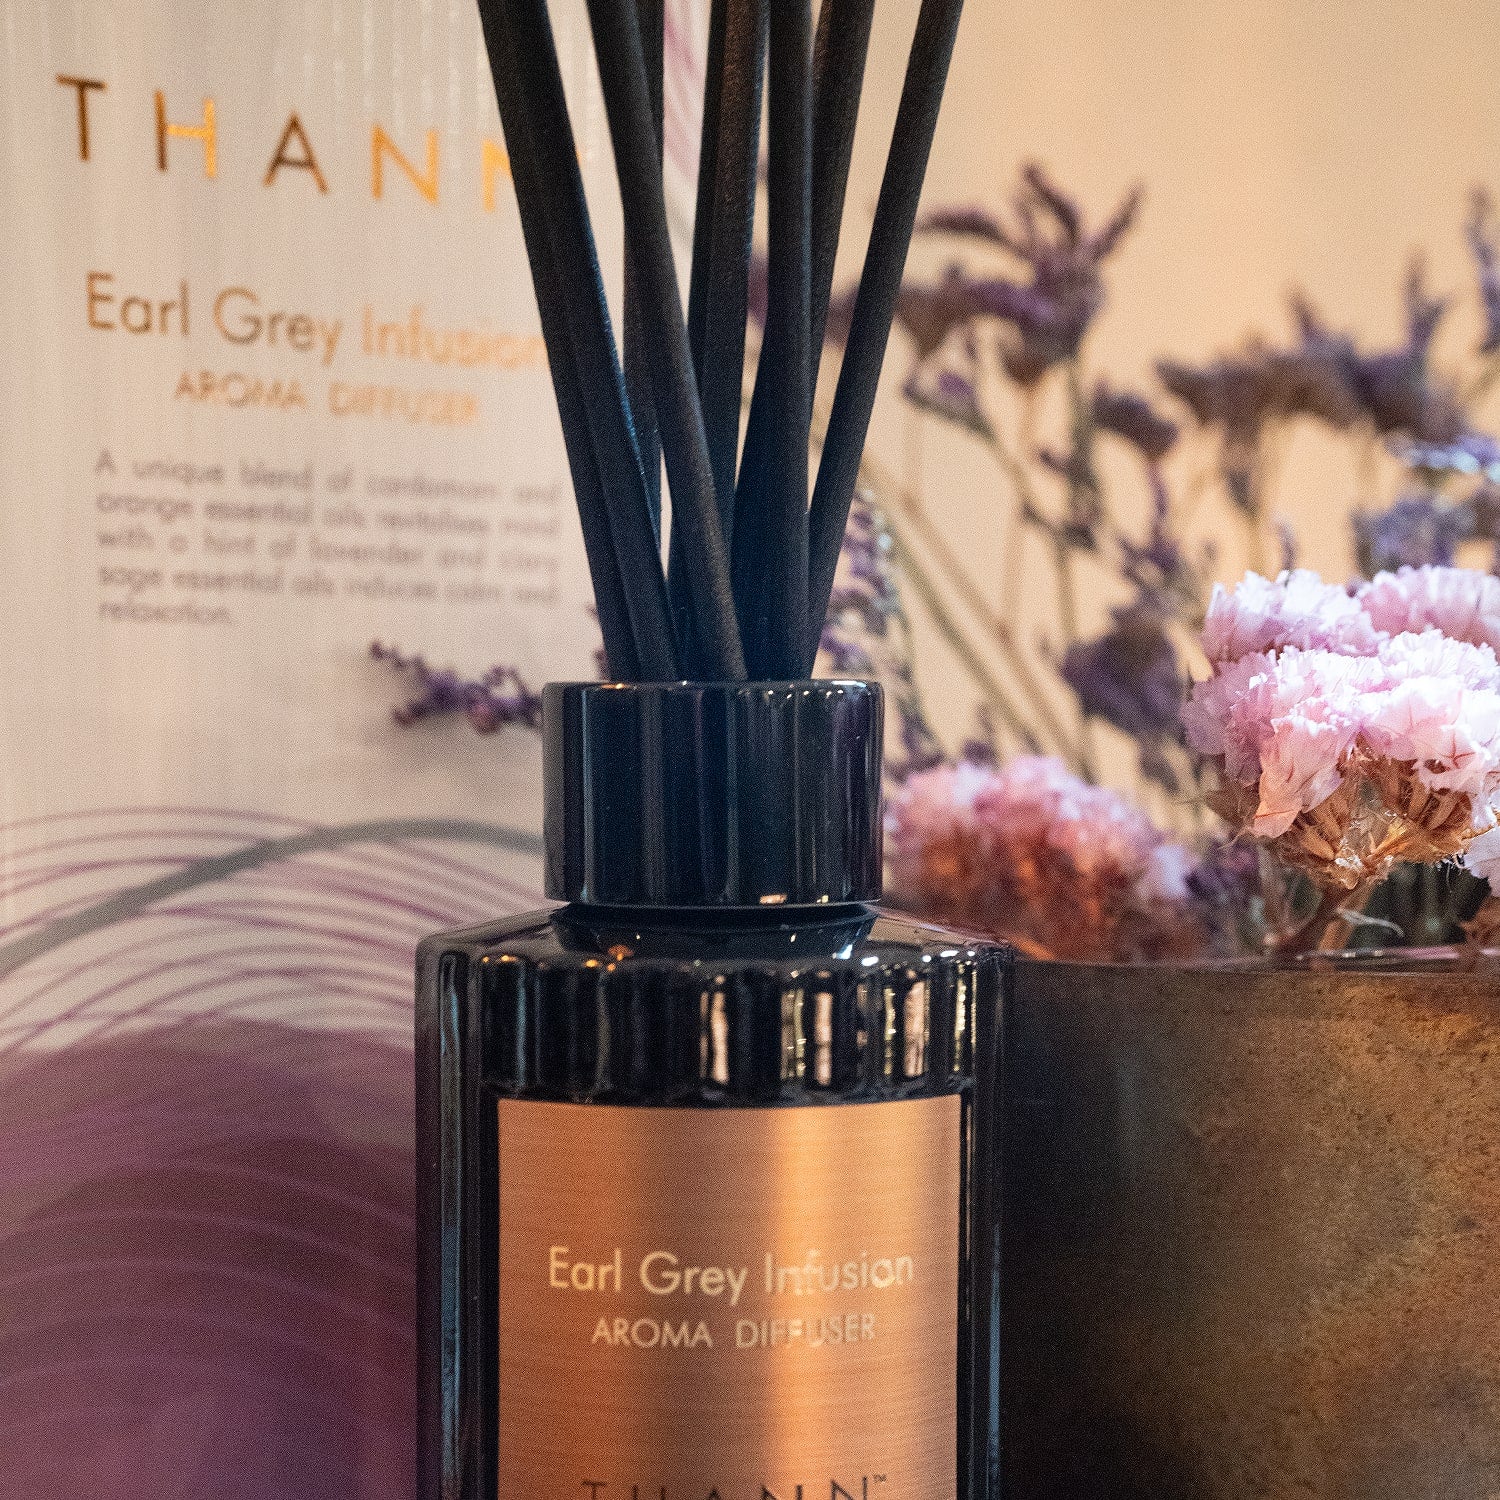 Thann Aroma Diffuser - Earl Gray Infusion